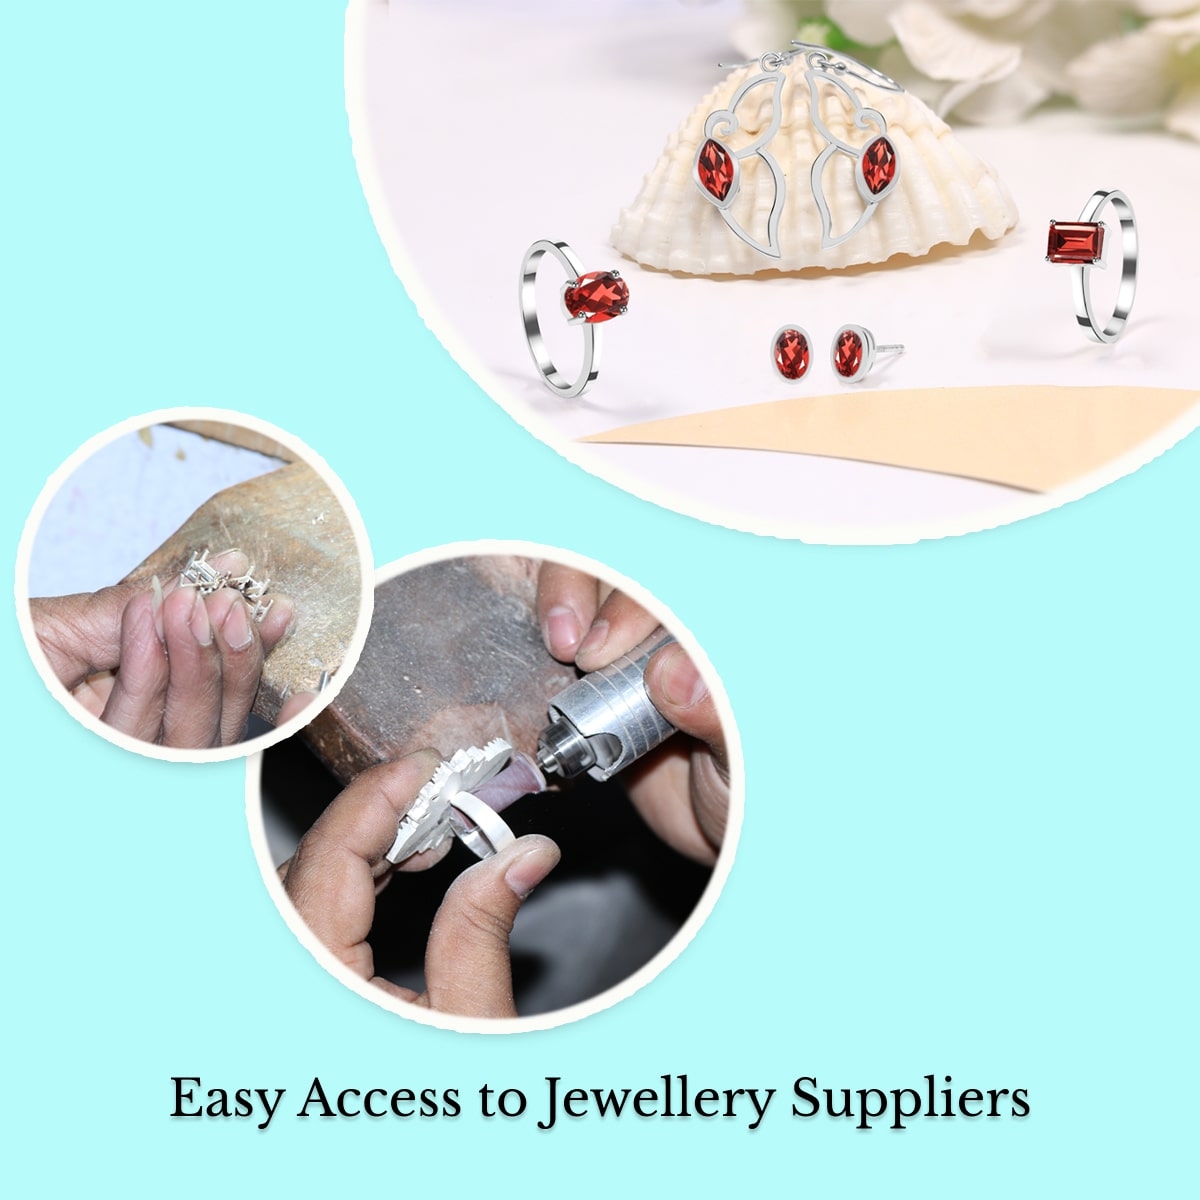 Reason 2: Finding Jewellery Suppliers is Easy